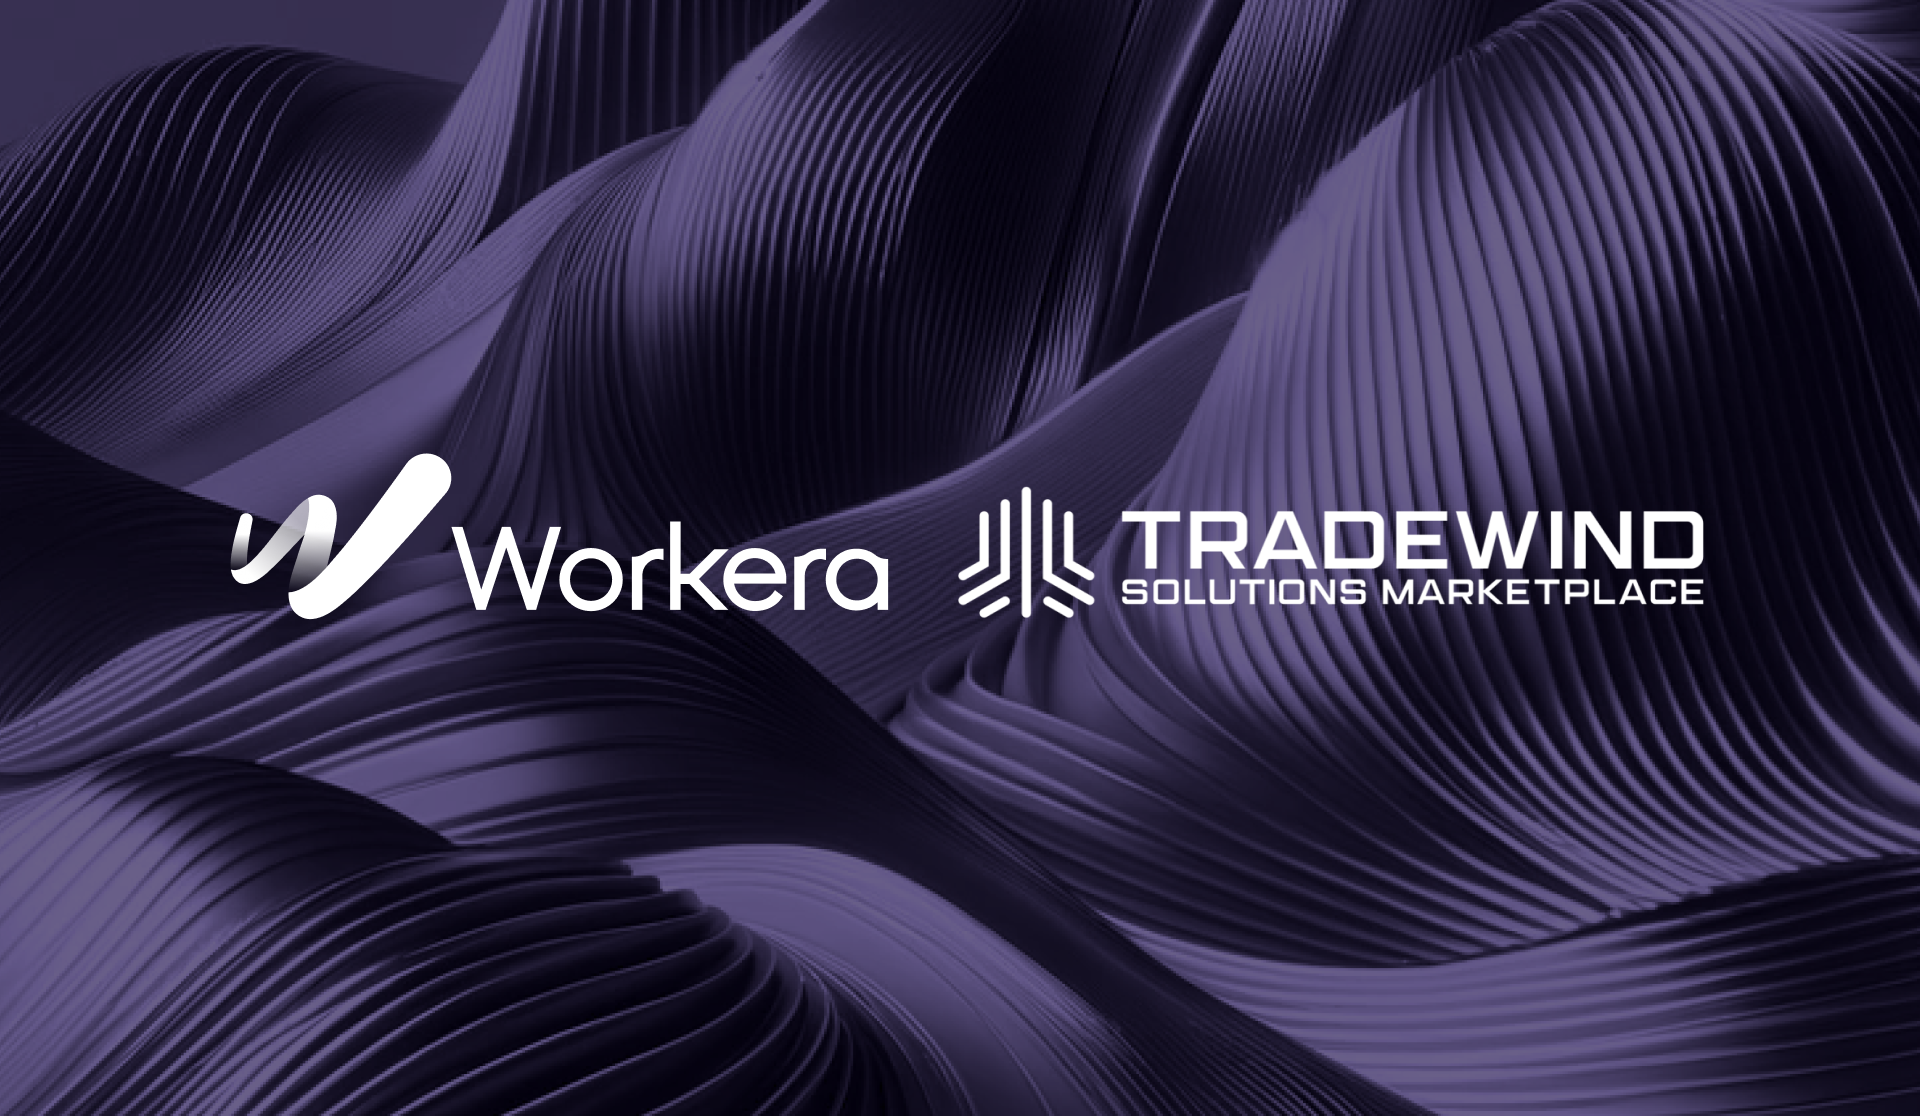 Workera Receives Awardable Status from the DoD Tradewinds Solutions Marketplace